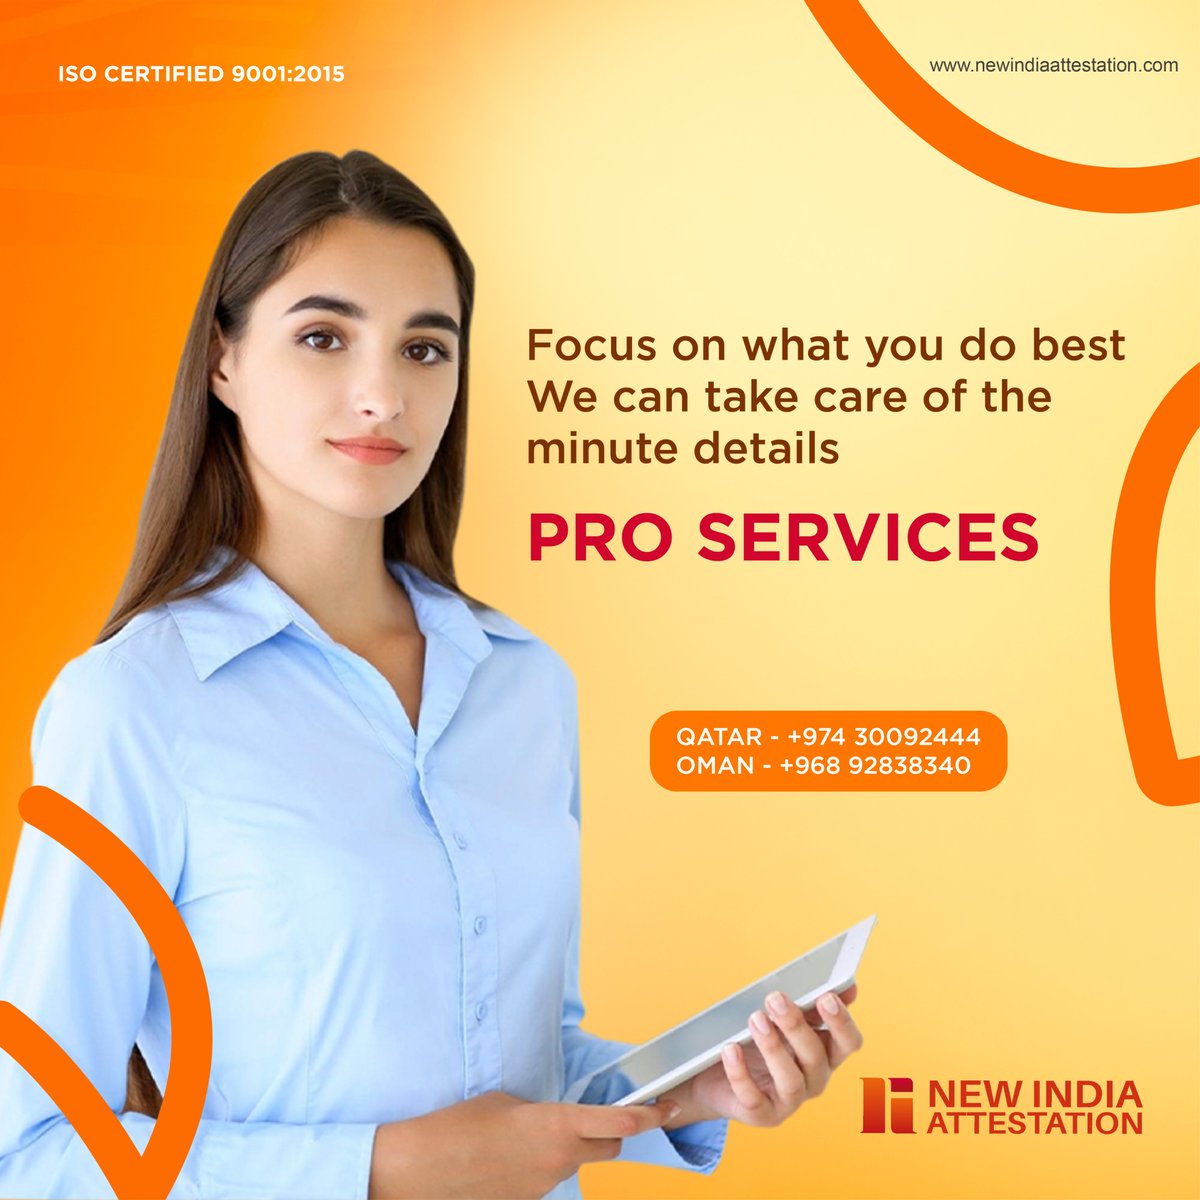 LOOKING FOR THE BEST ATTESTATION SERVICES?
NEW INDIA ATTESTATION Services is a leading company that deals in Document Handling, Attestation, Apostille, and HRD services.

#NewIndiaAttestation #AttestationServices #DocumentVerification #GlobalAttestation #PromptService